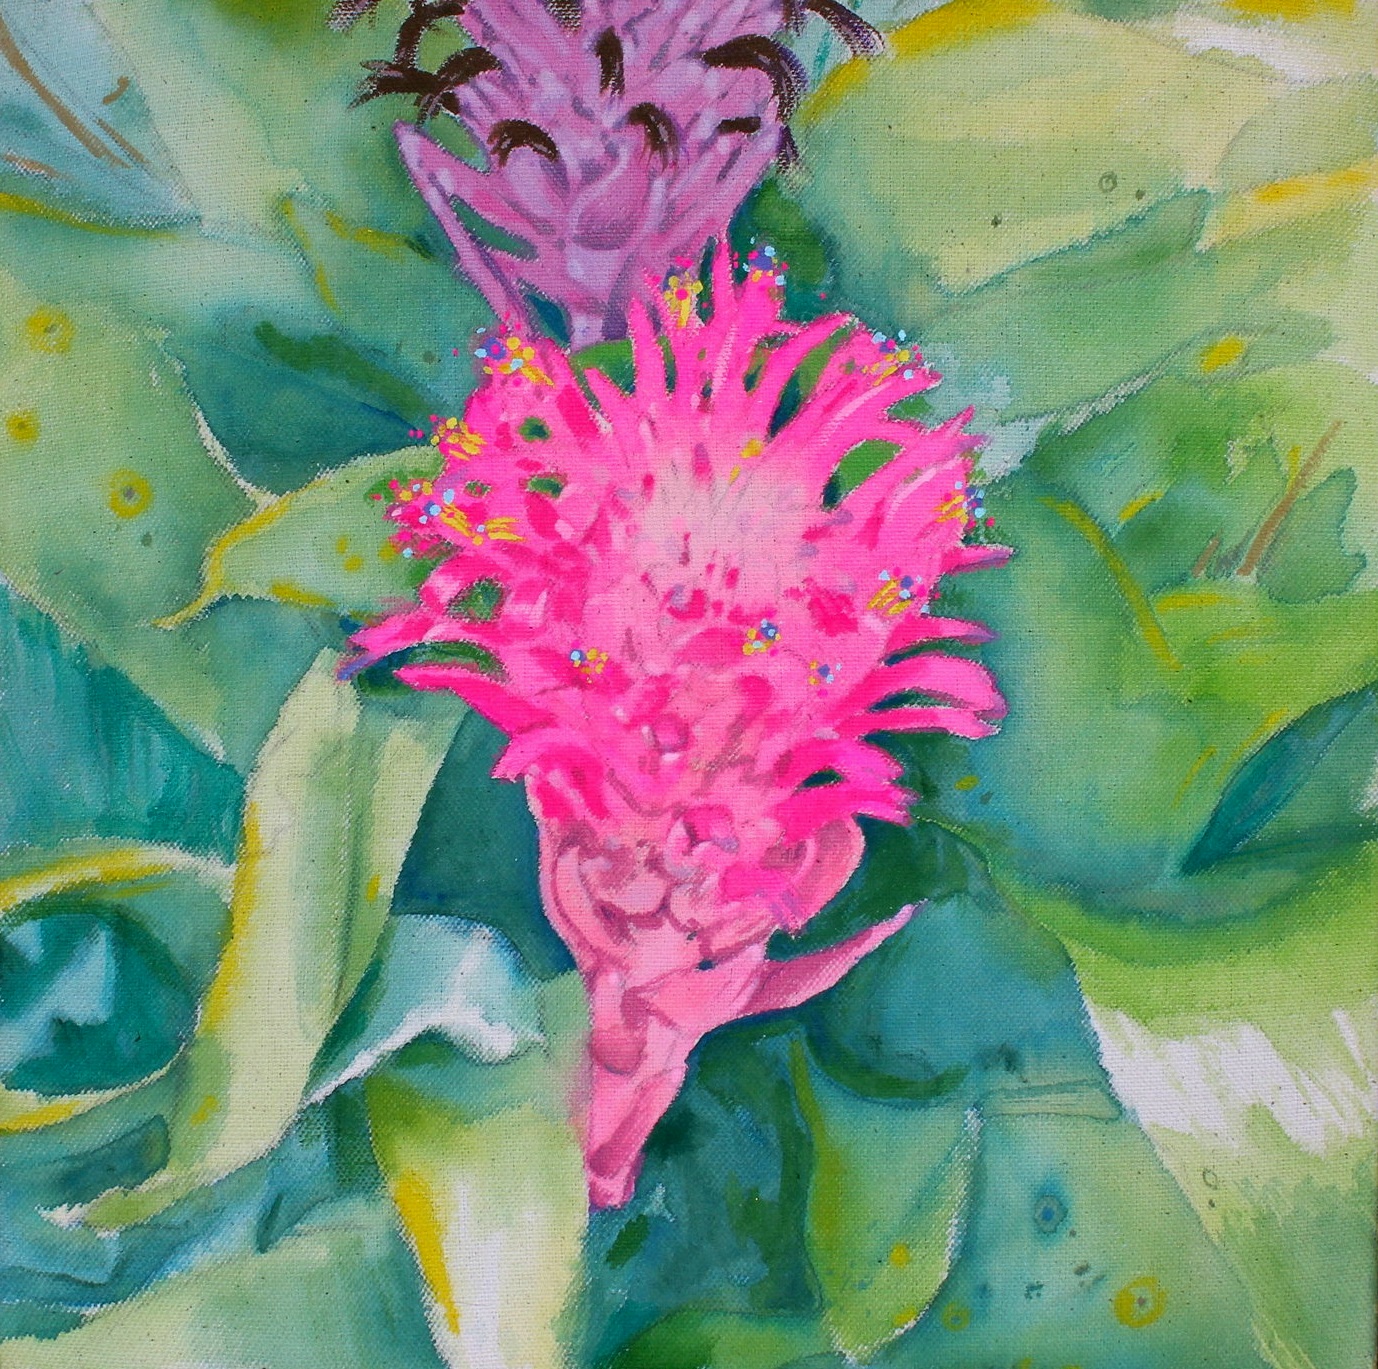   Bromeliads  gouache on raw canvas. 2018  exhibited -  Ocala City Hall during A Floral Retrospective 2022;   Daggerwing Nature Center, Boca Raton, FL 2018  